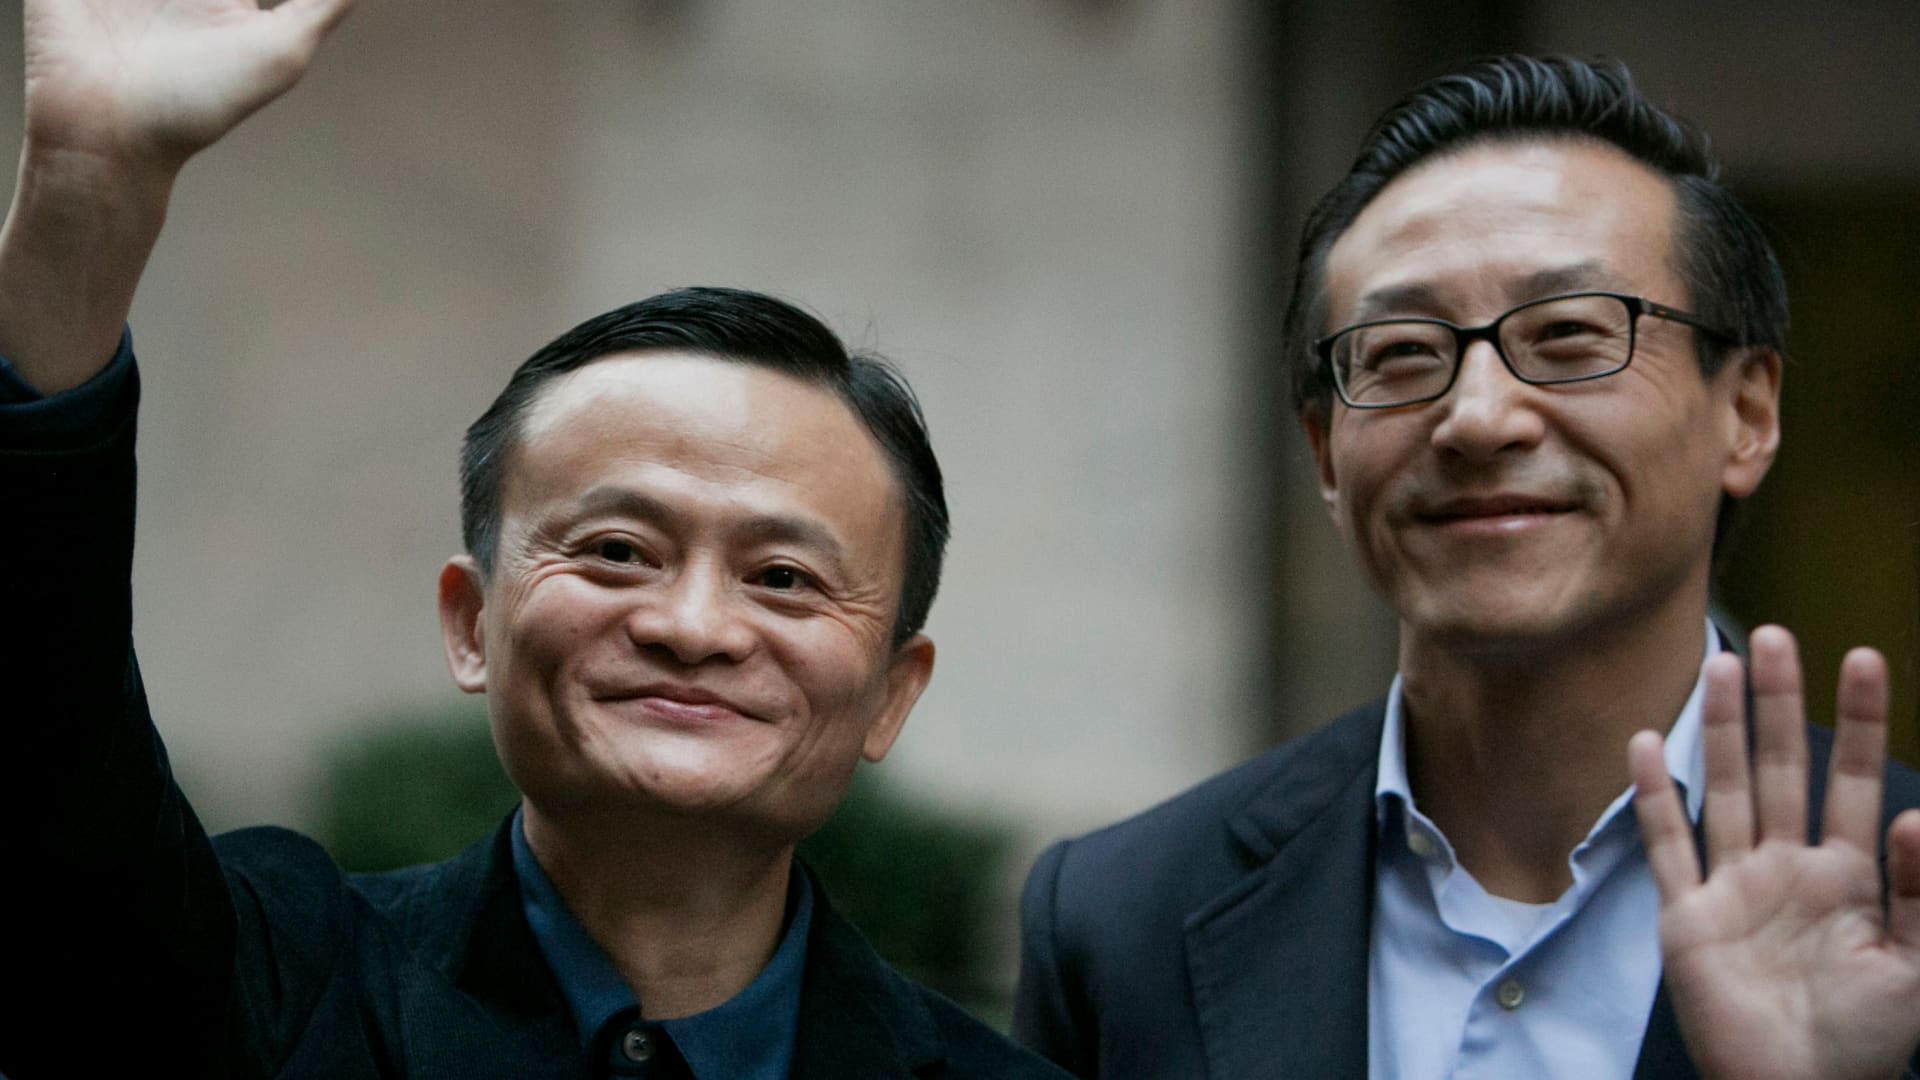 Alibaba co-founders buy more than 0 million worth of shares, sending stock up